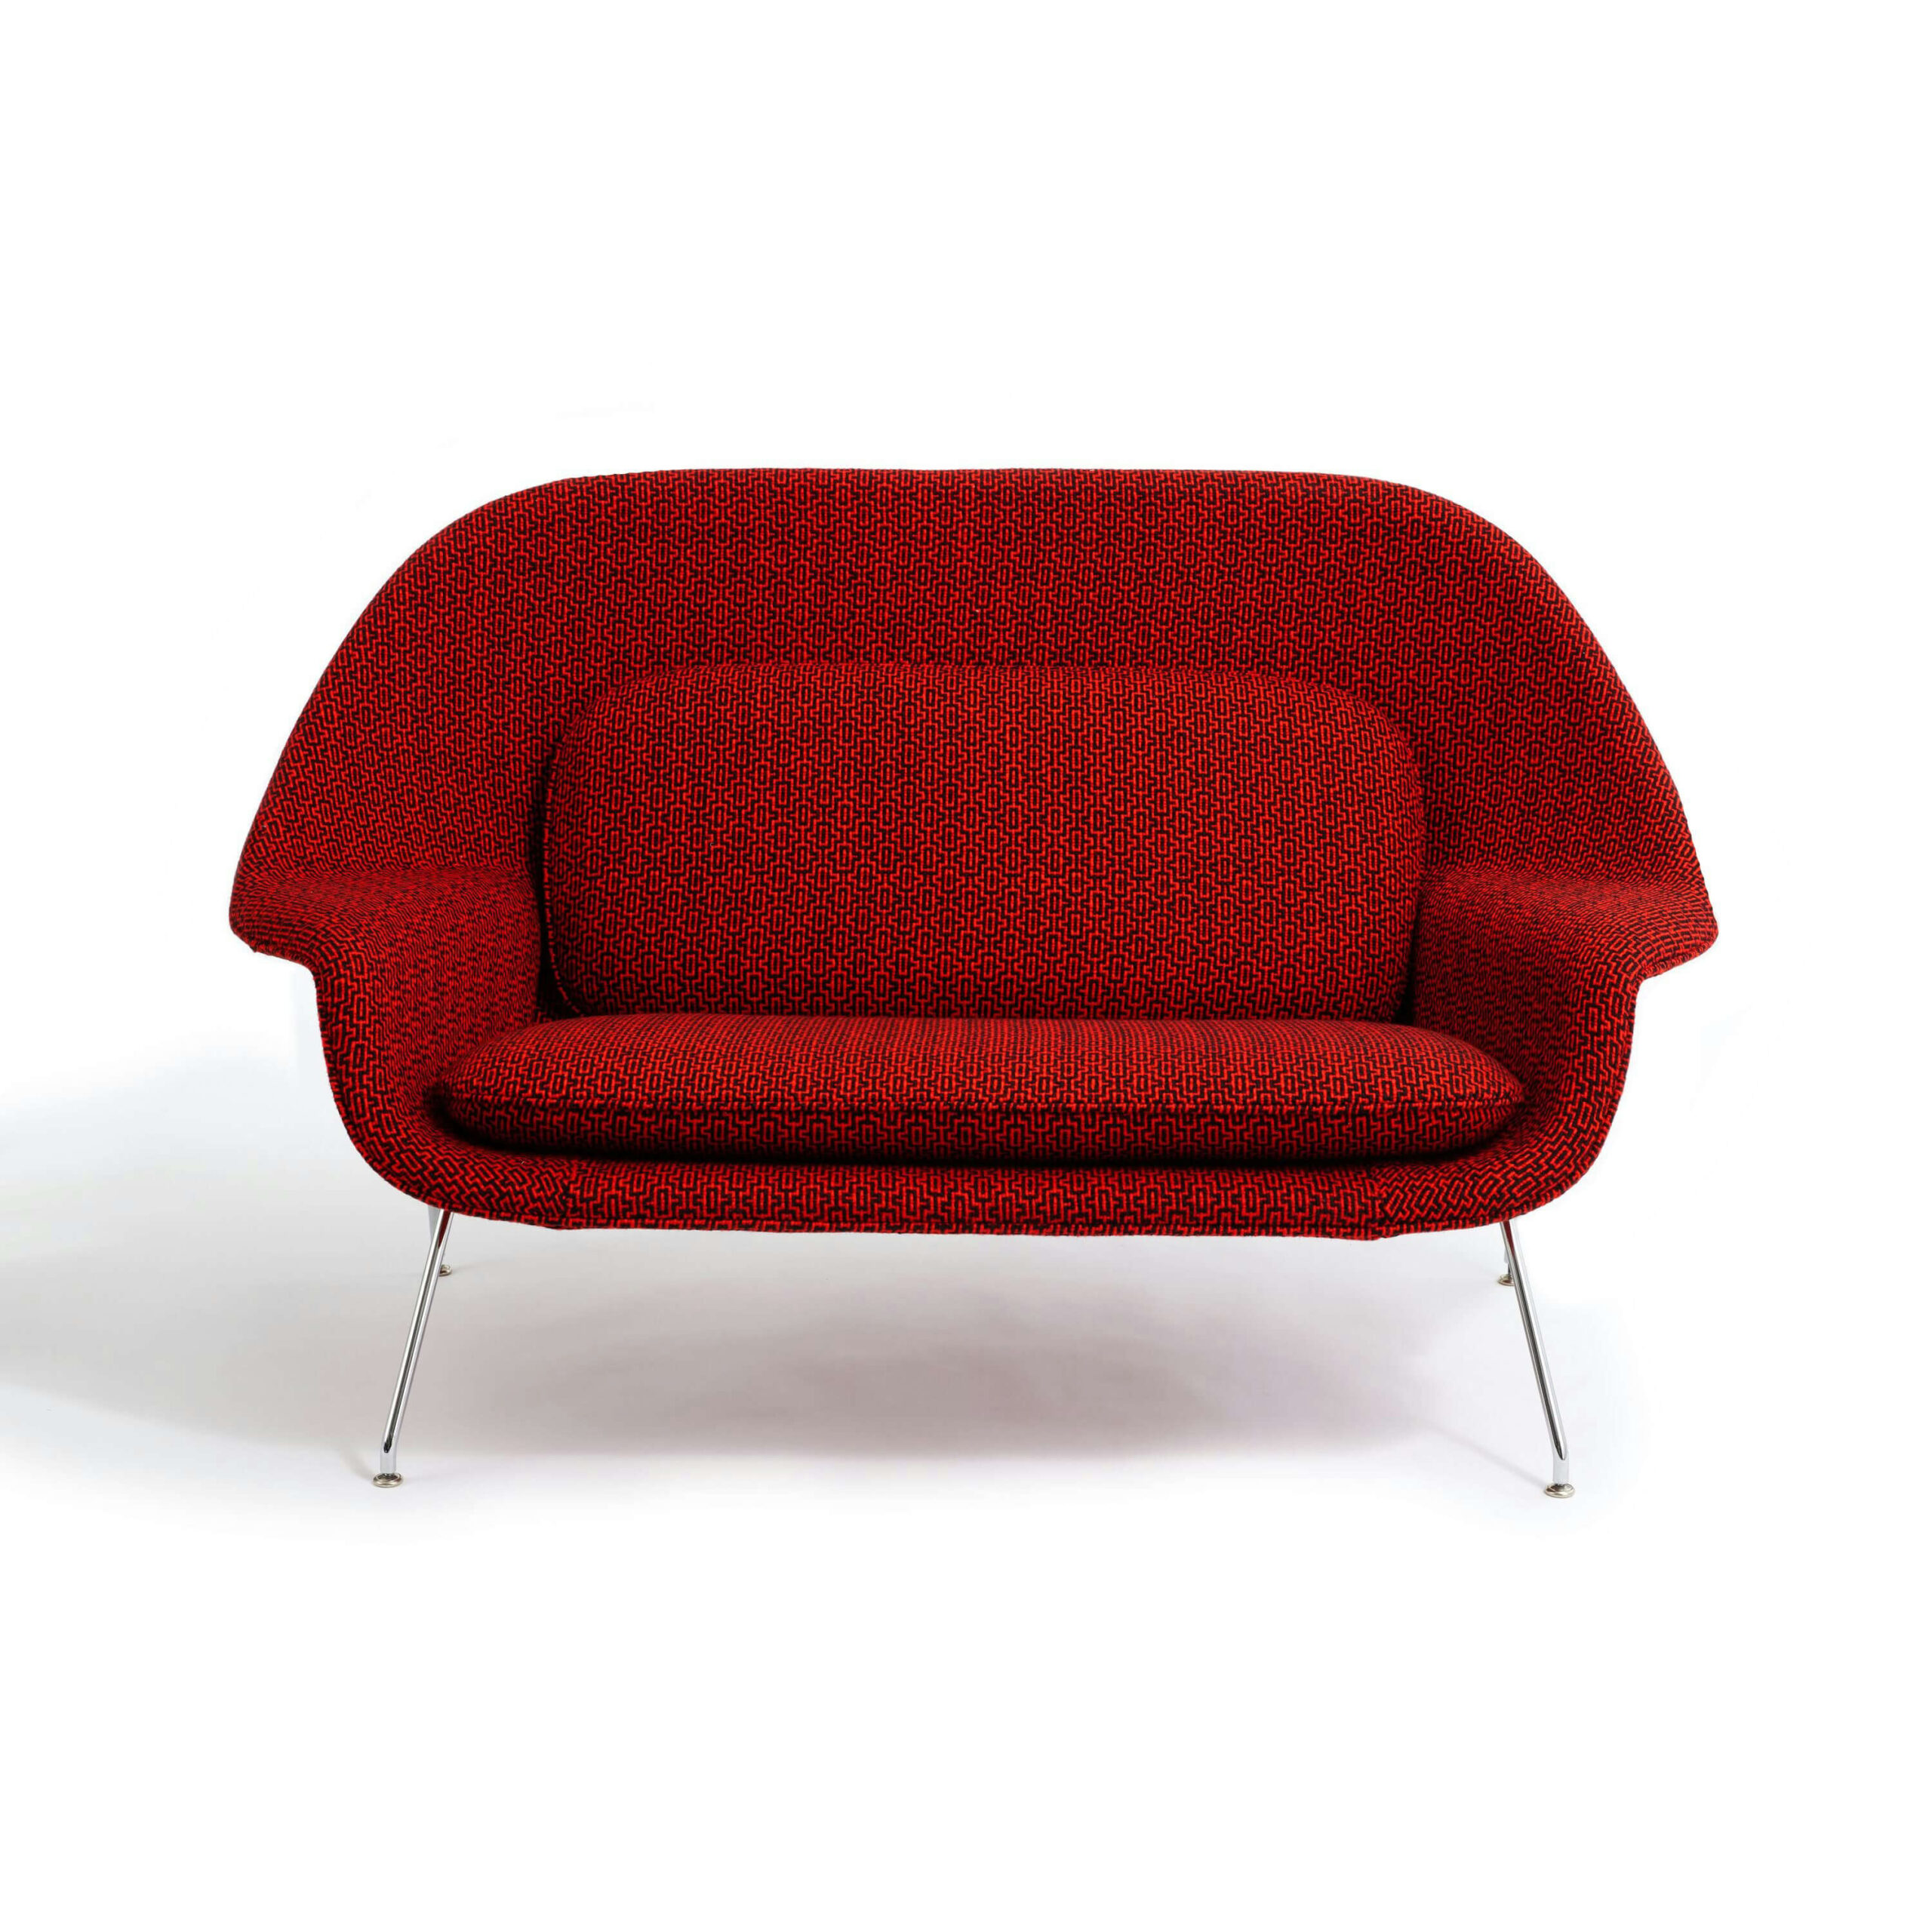 Womb Sofa in red in a white background